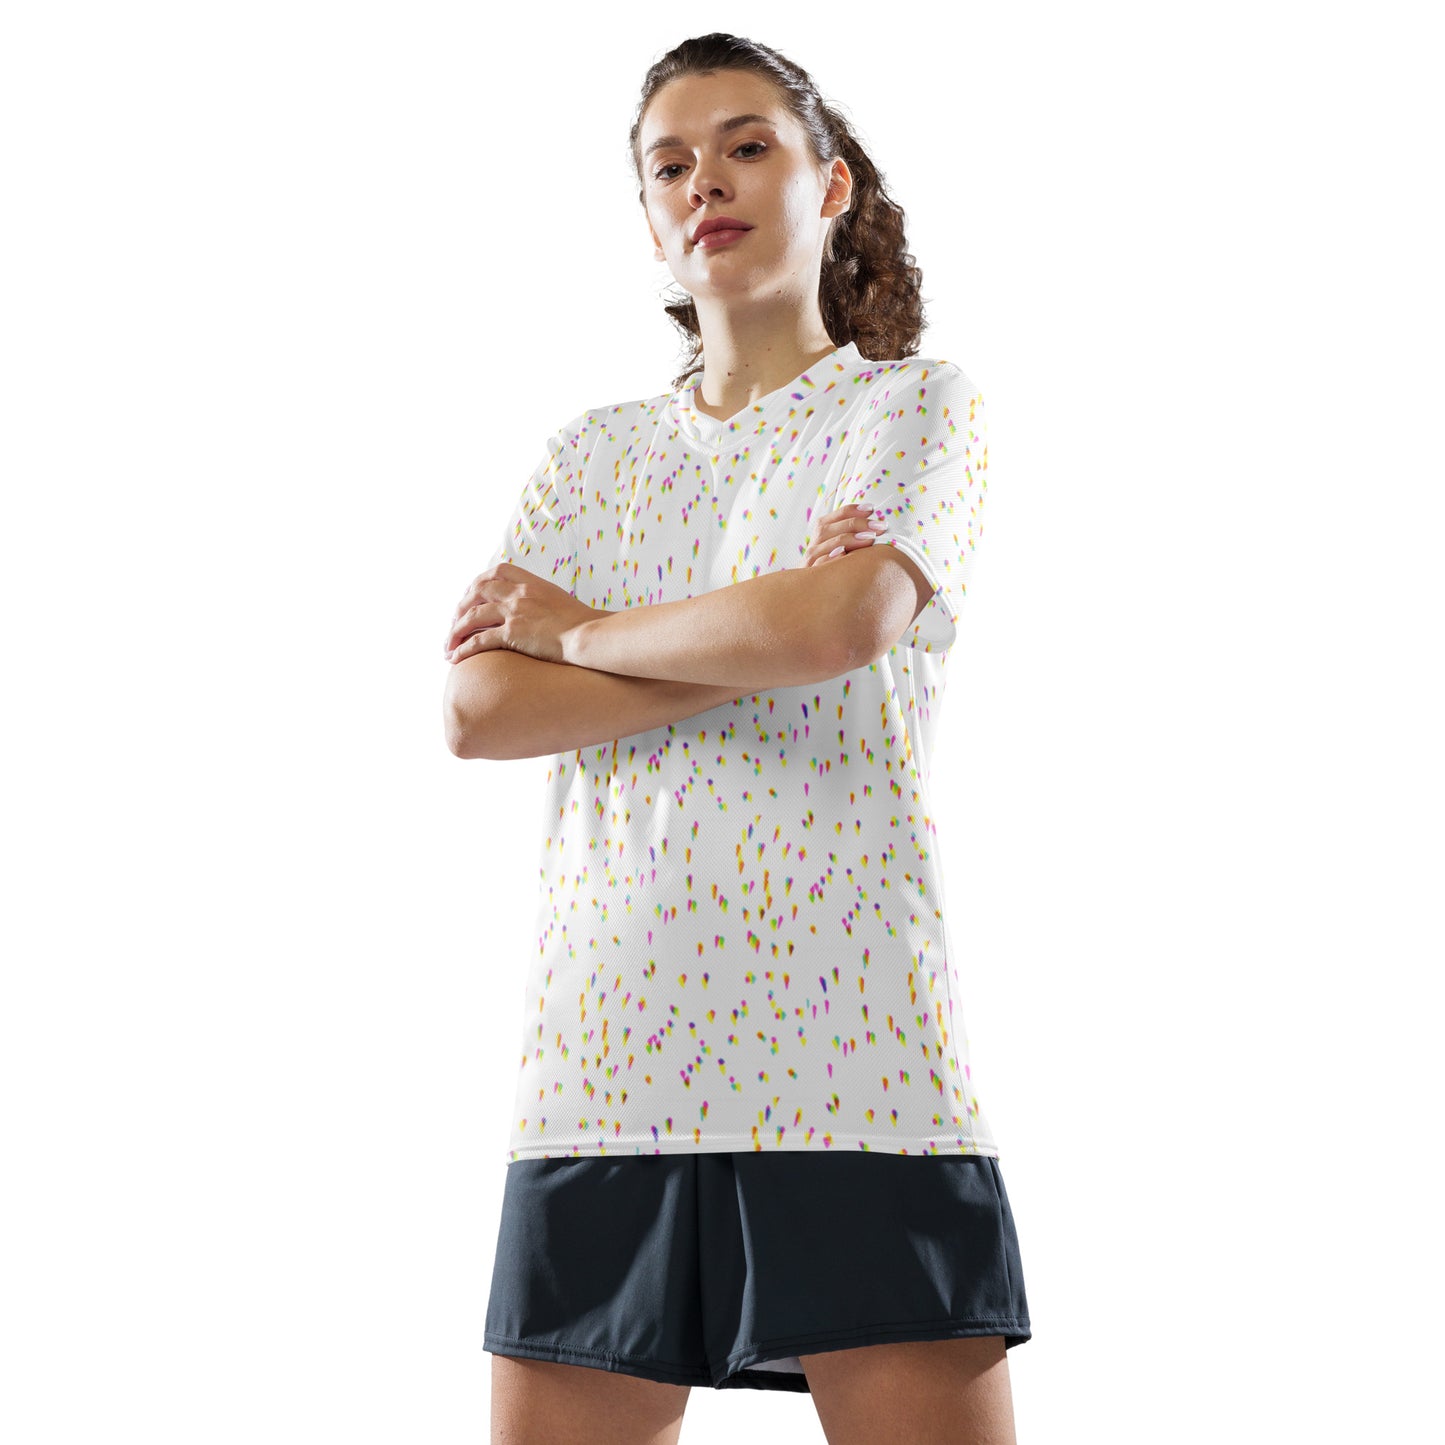 Recycled unisex sports jersey - DOTS